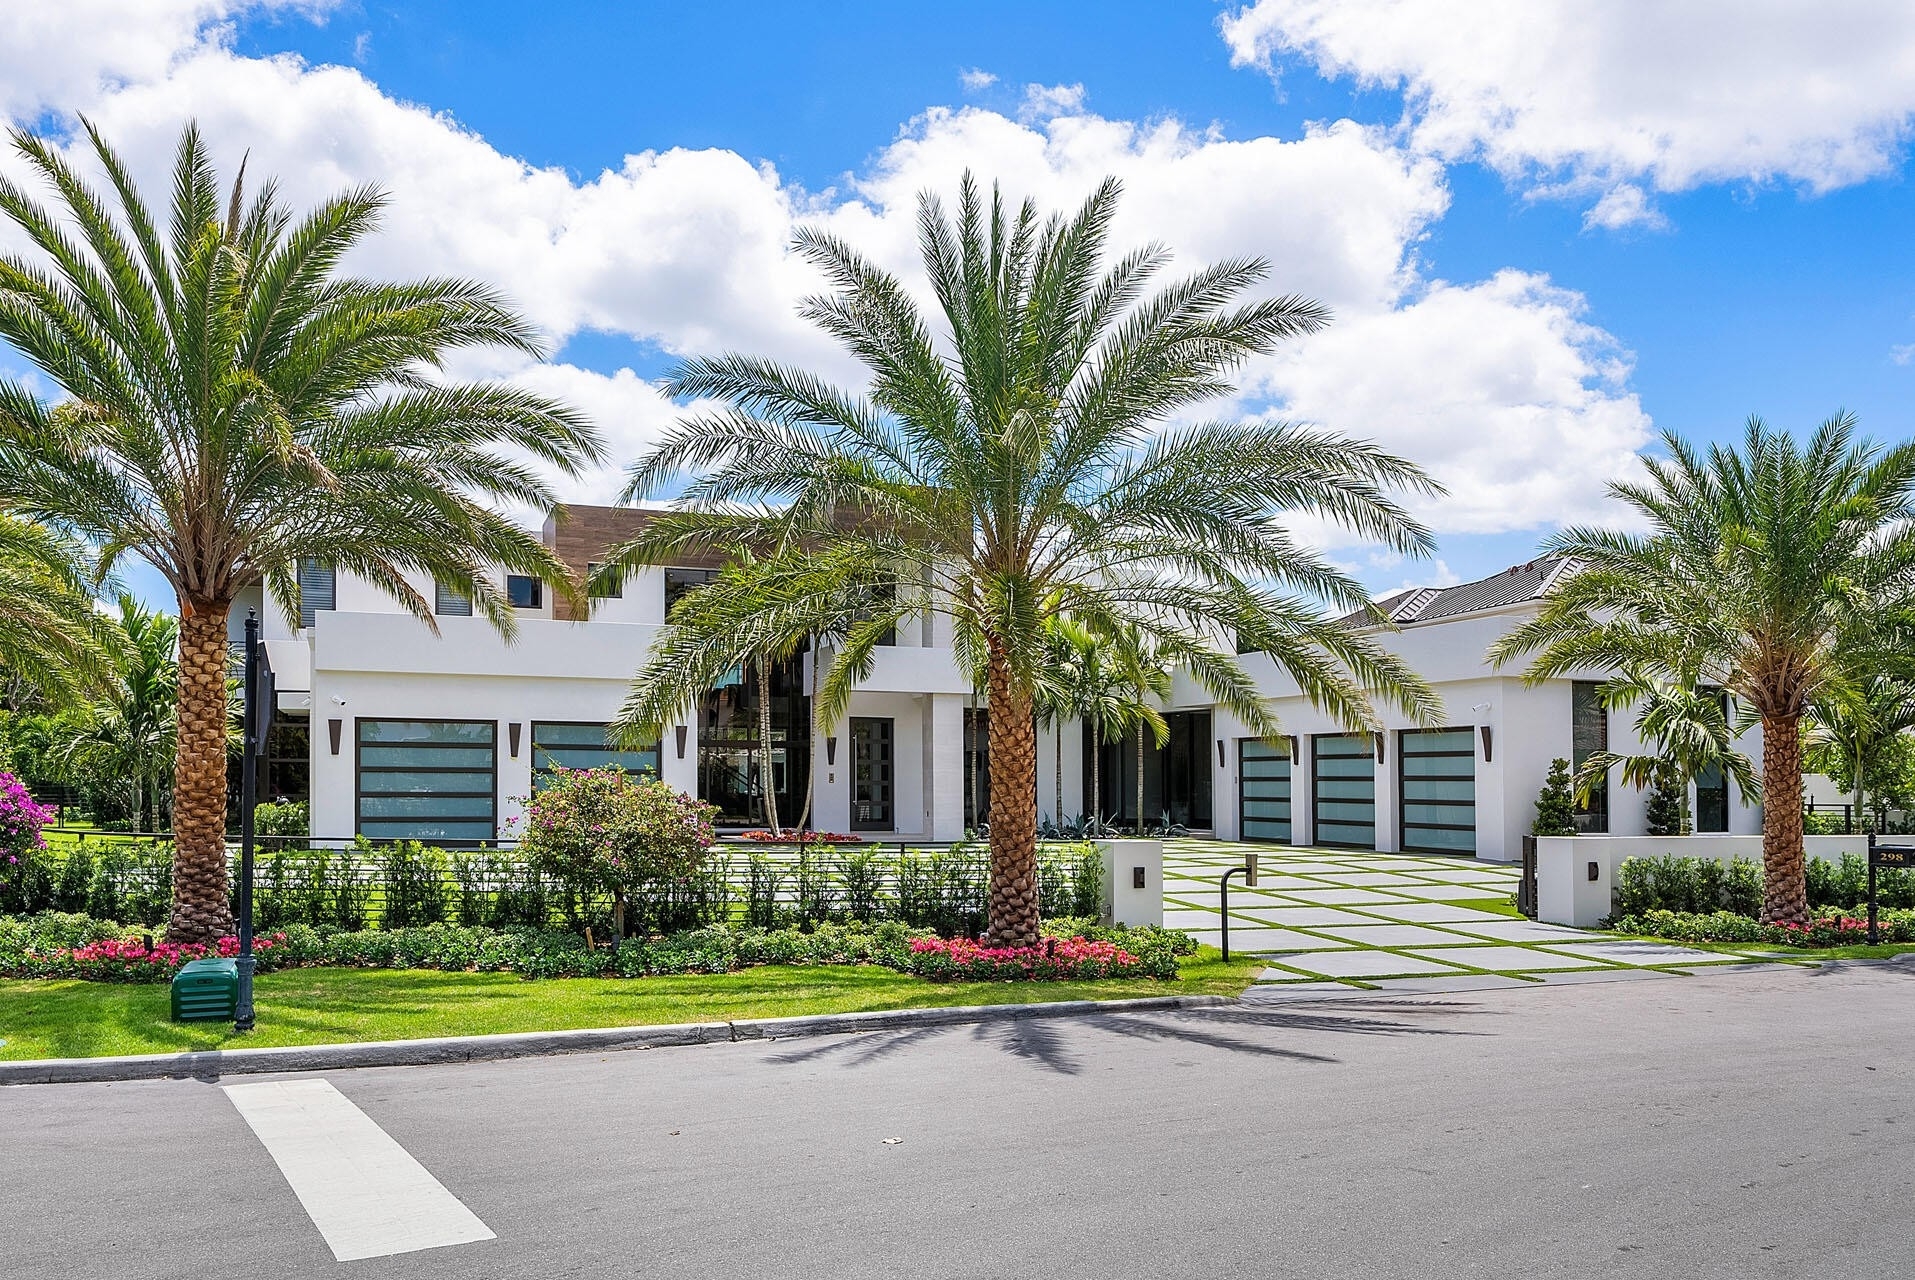 Property at Royal Palm Yacht and Country Club, Boca Raton, FL 33432